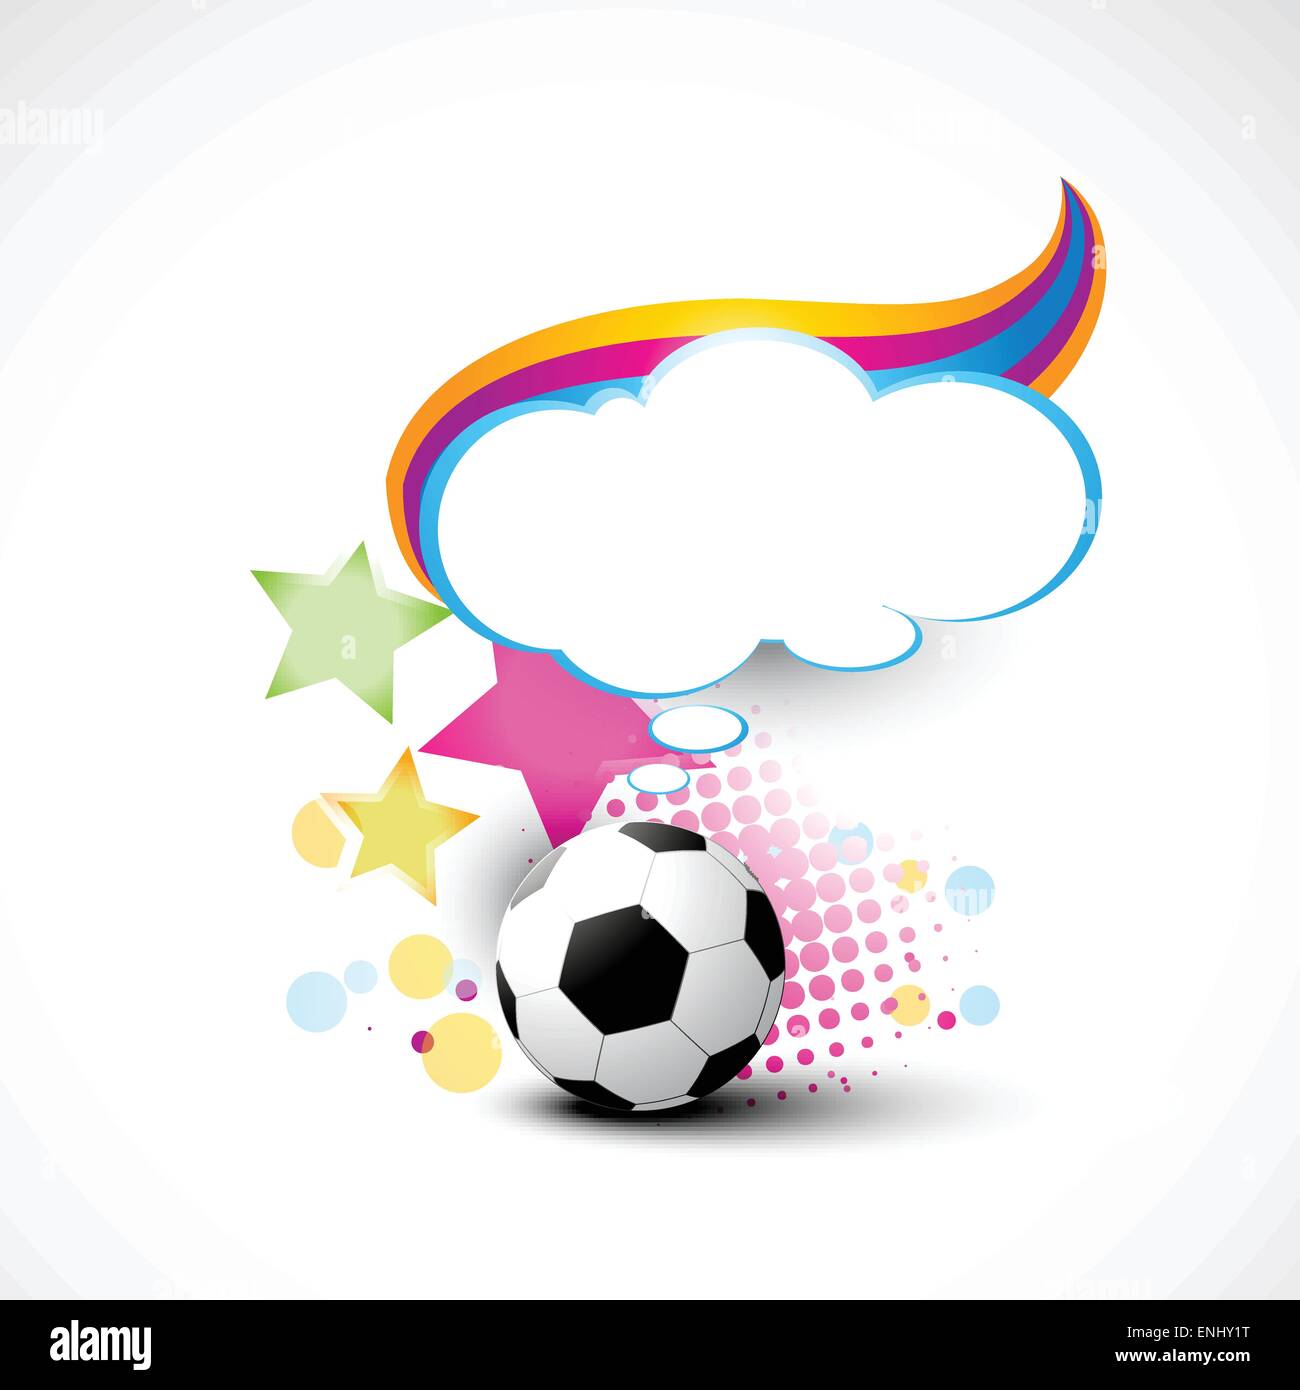 football illustration with thinking bubble Stock Vector